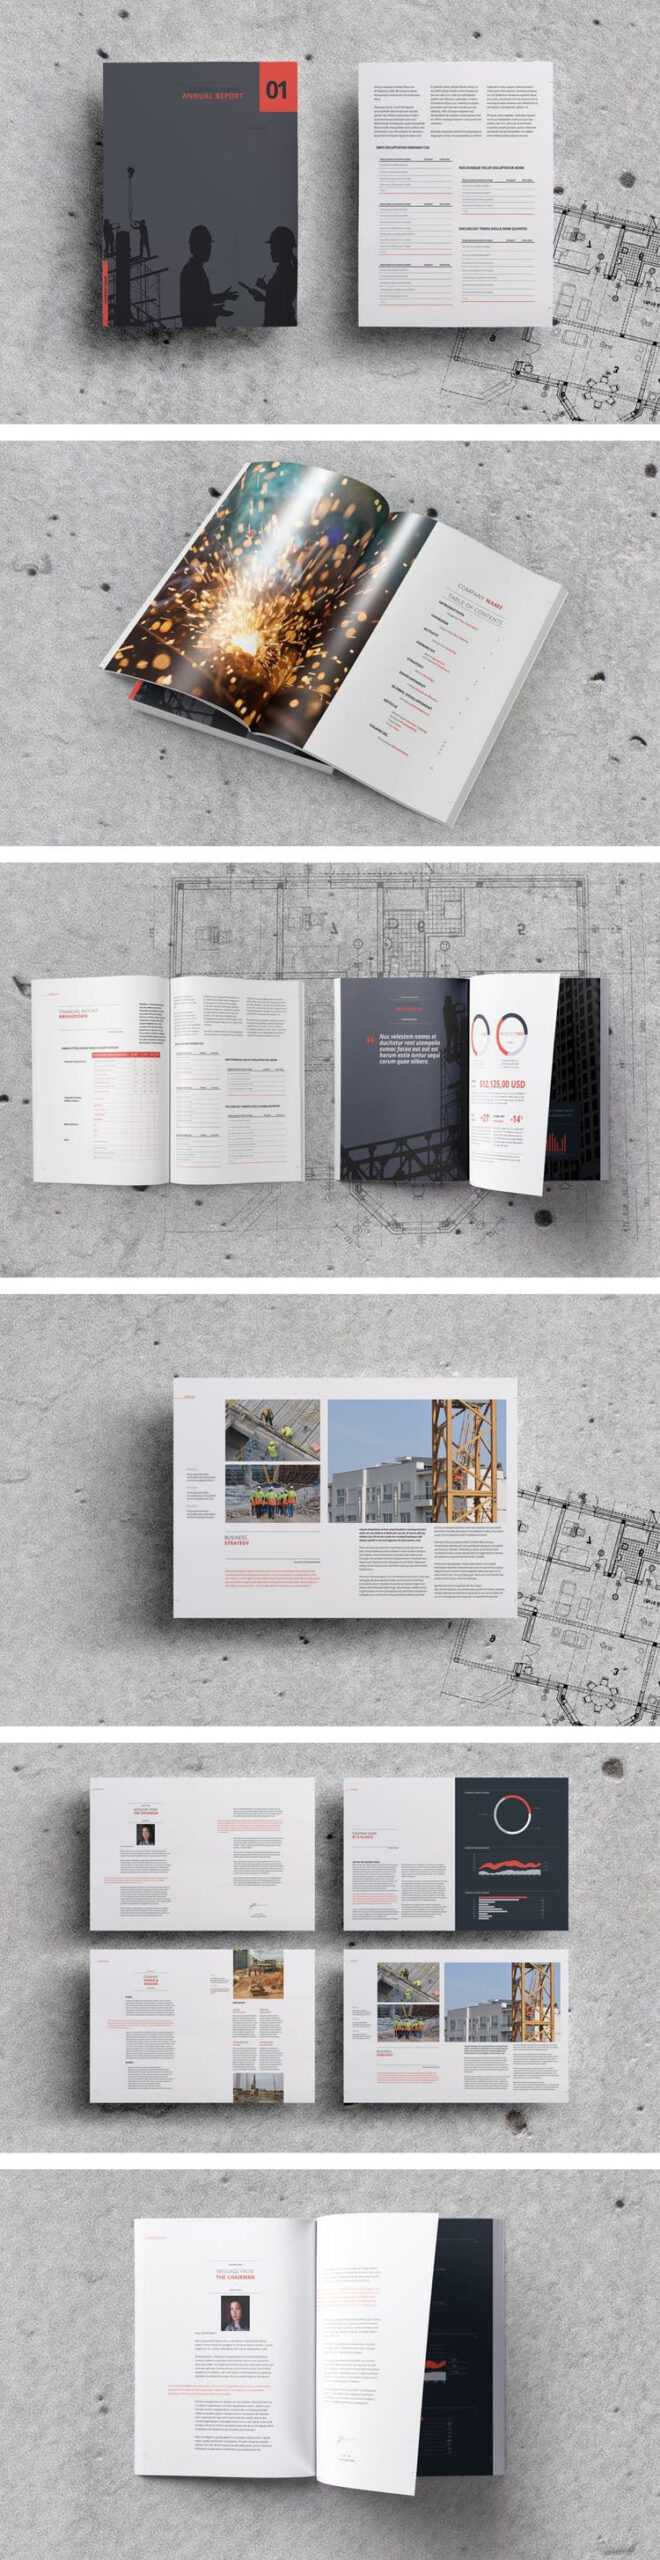 60 Best Annual Report Design Templates Throughout Free Annual Report Template Indesign